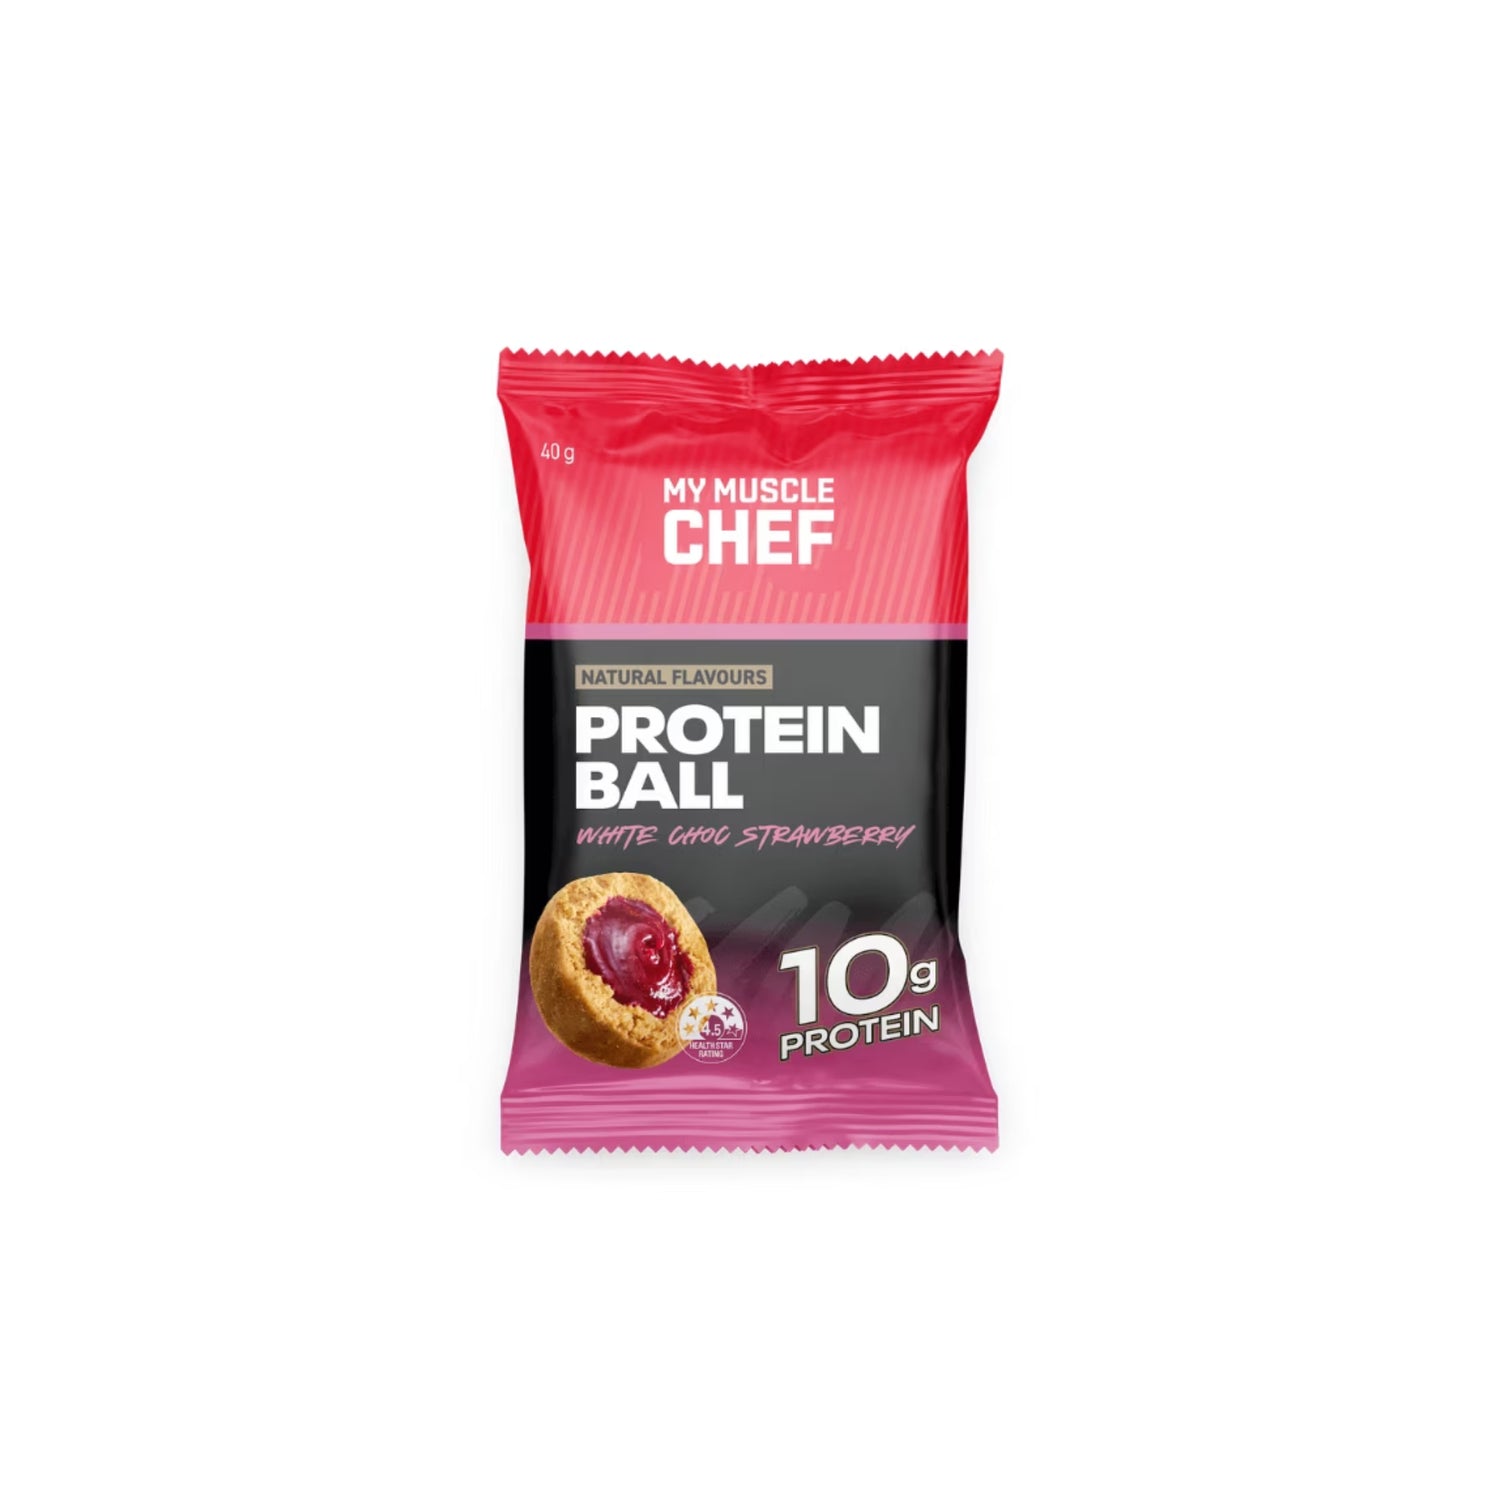 My Muscle Chef Protein Ball 40g